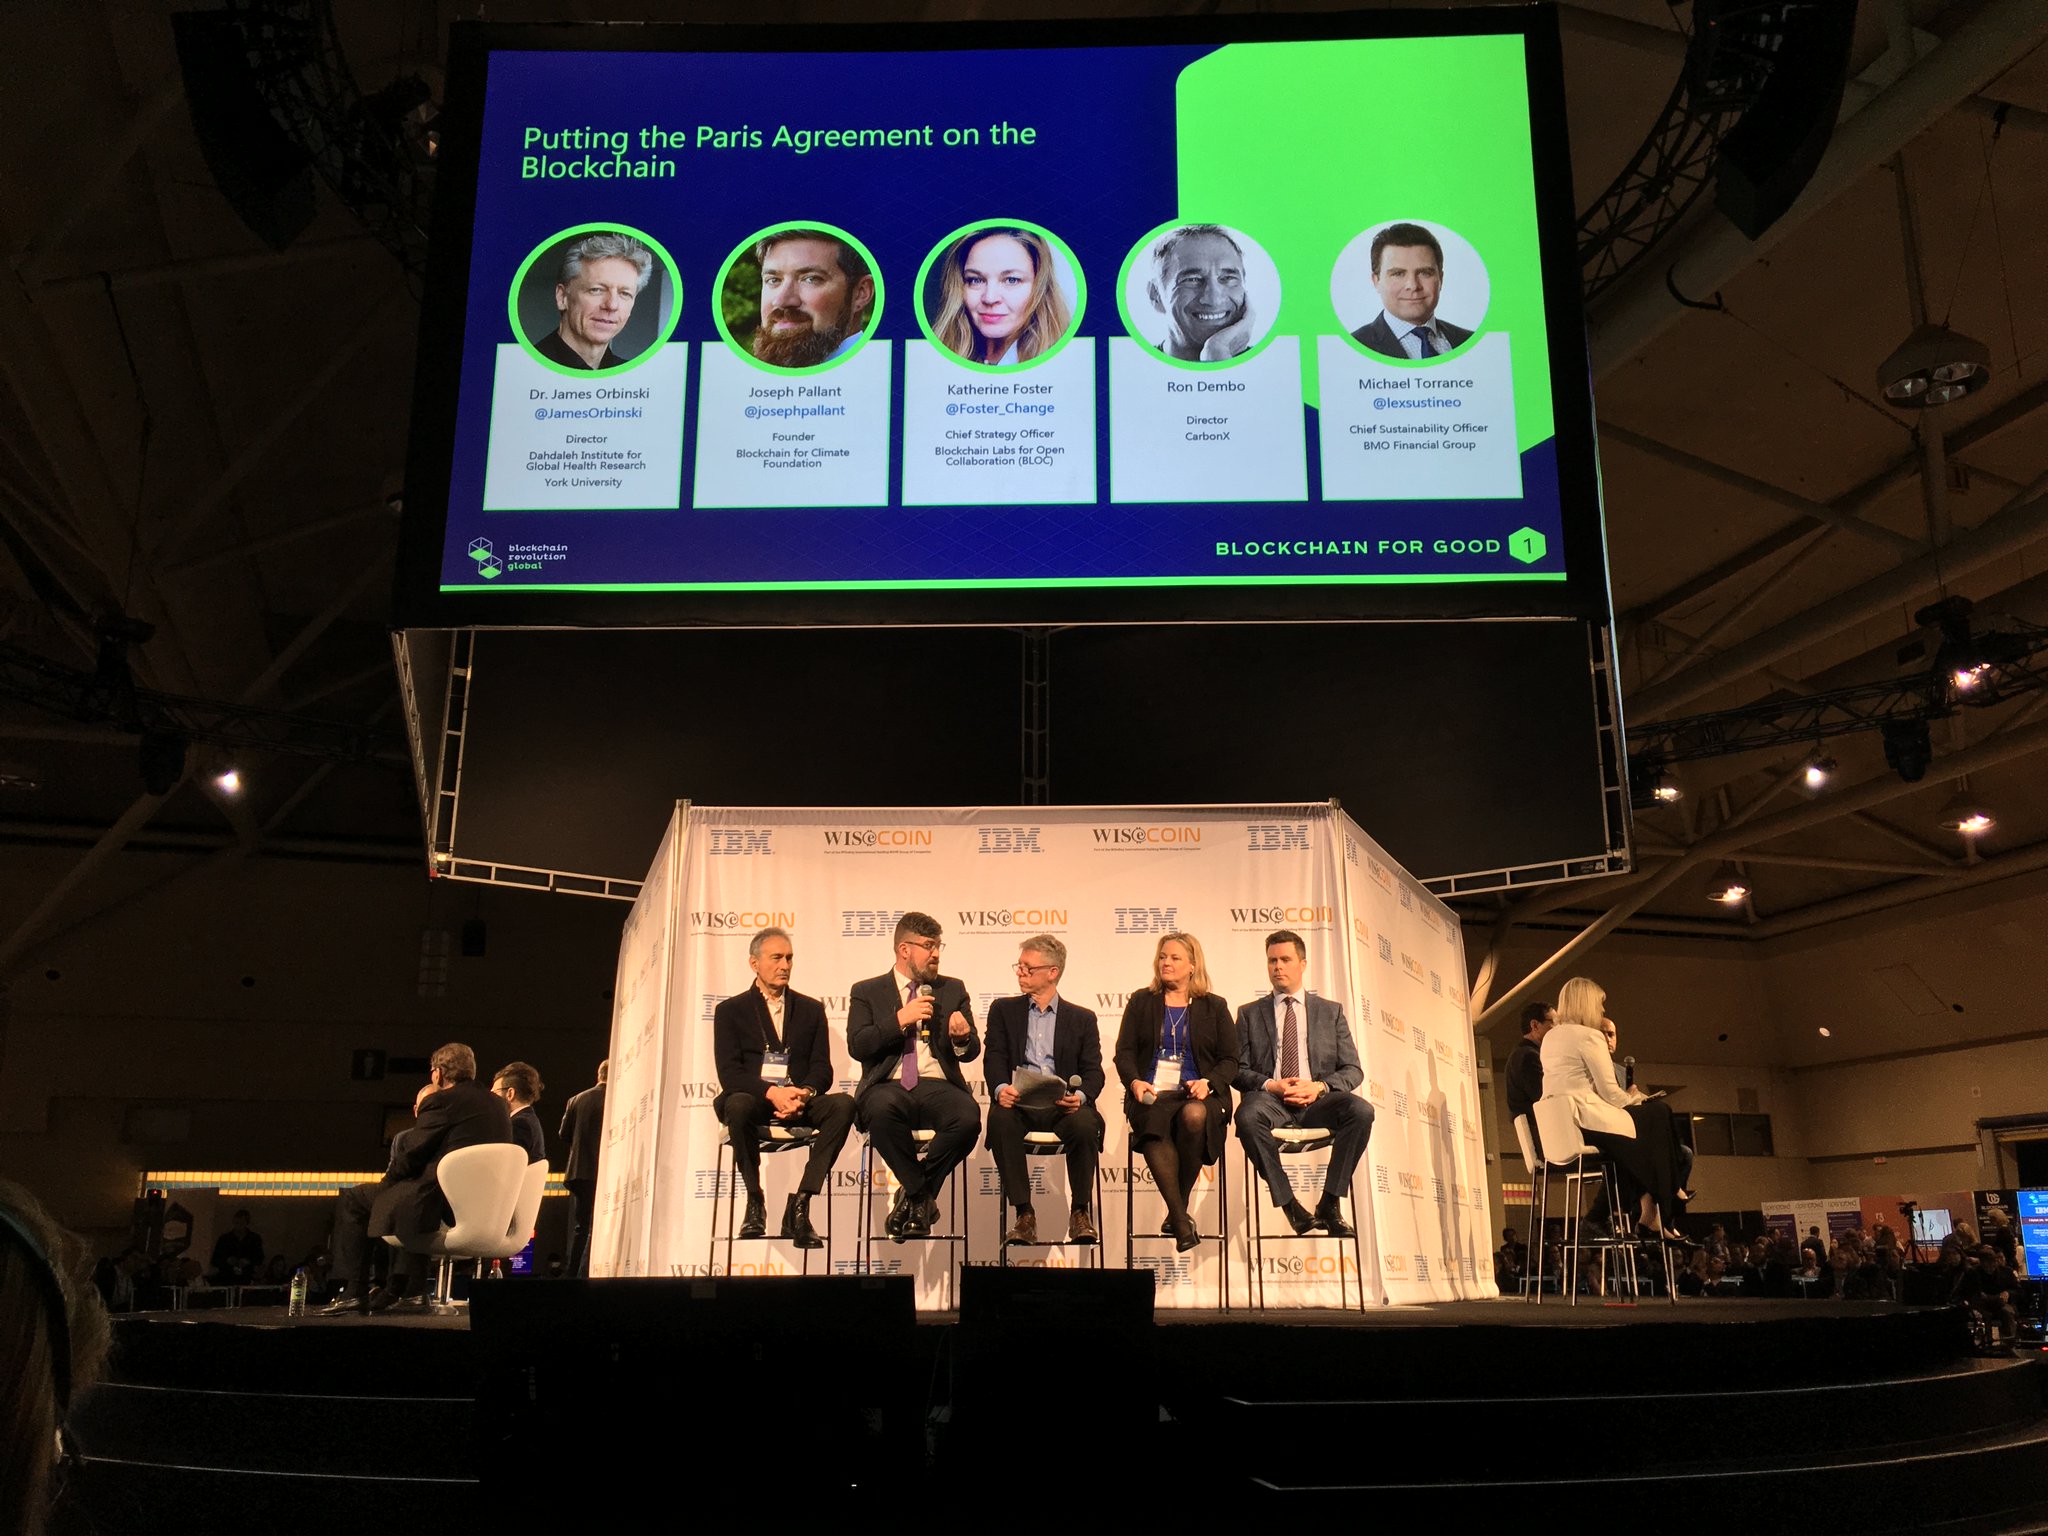 Five people sit in a row on a stage at the Blockchain Revolution Global conference, including Dahdaleh Institute Director James Orbinski and Joseph Pallant